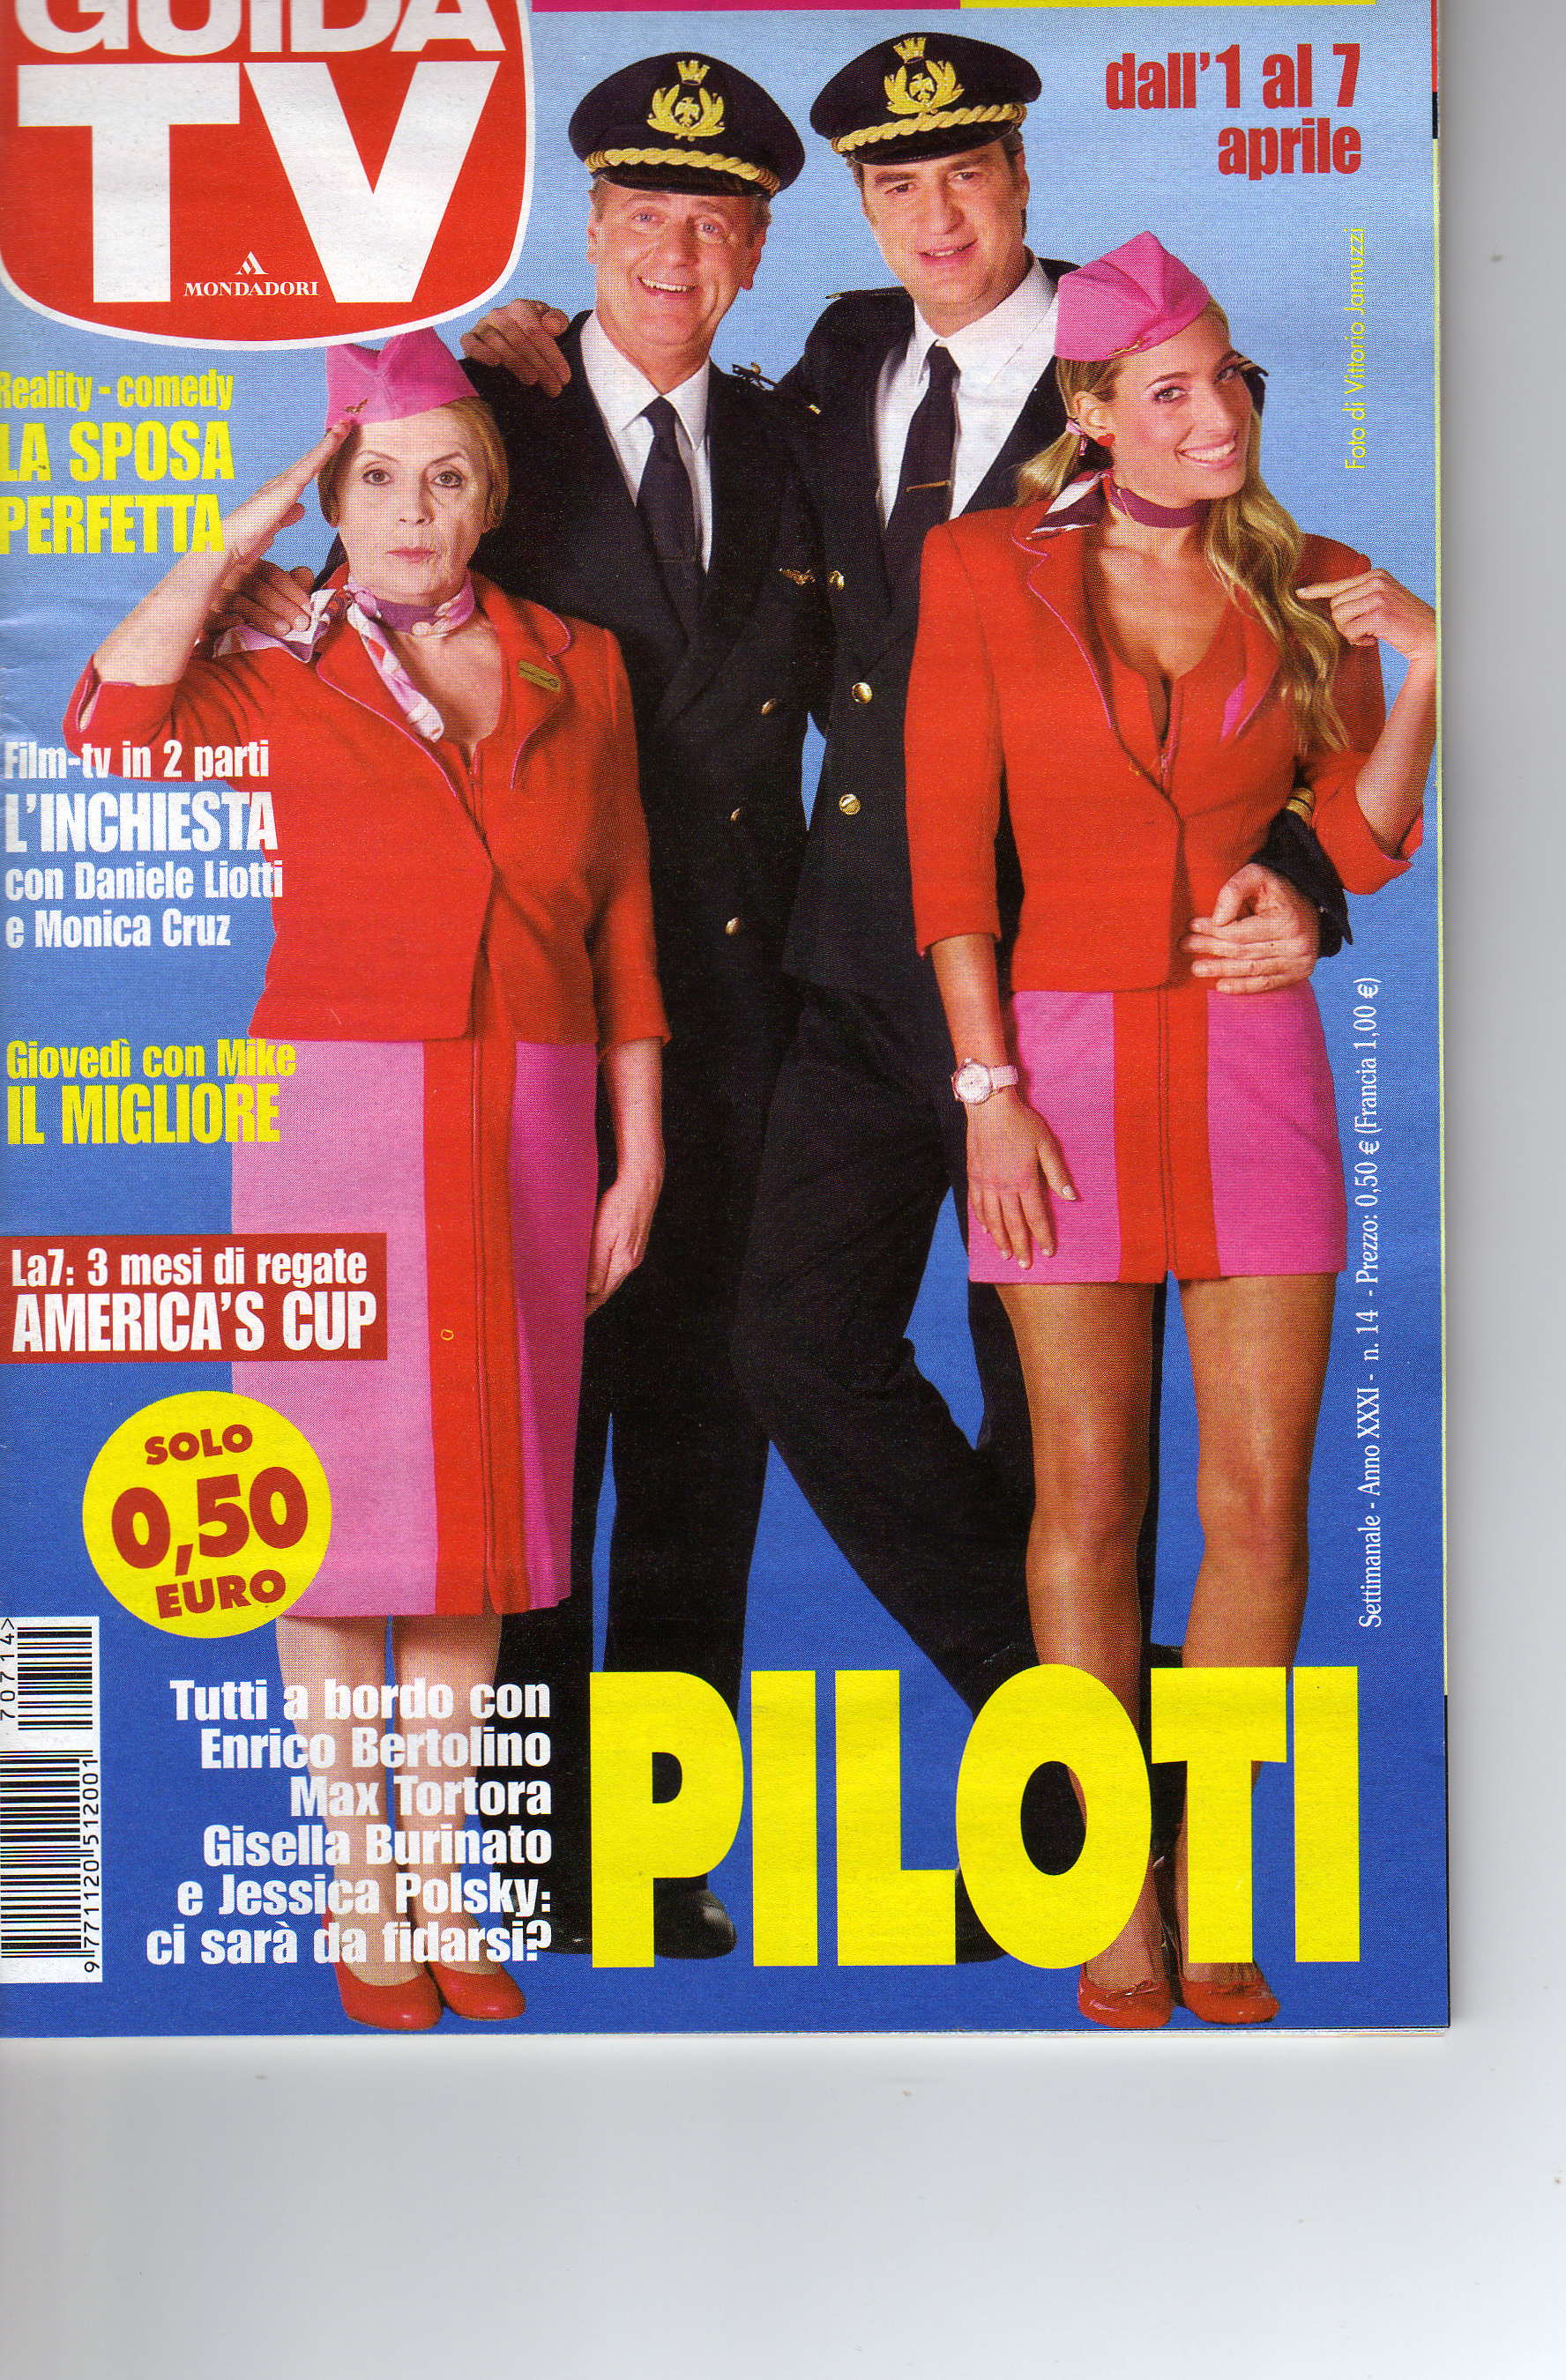 Jessica Polsky with the rest of the cast of the primetime network sitcom PILOTS on the cover of TV Guide